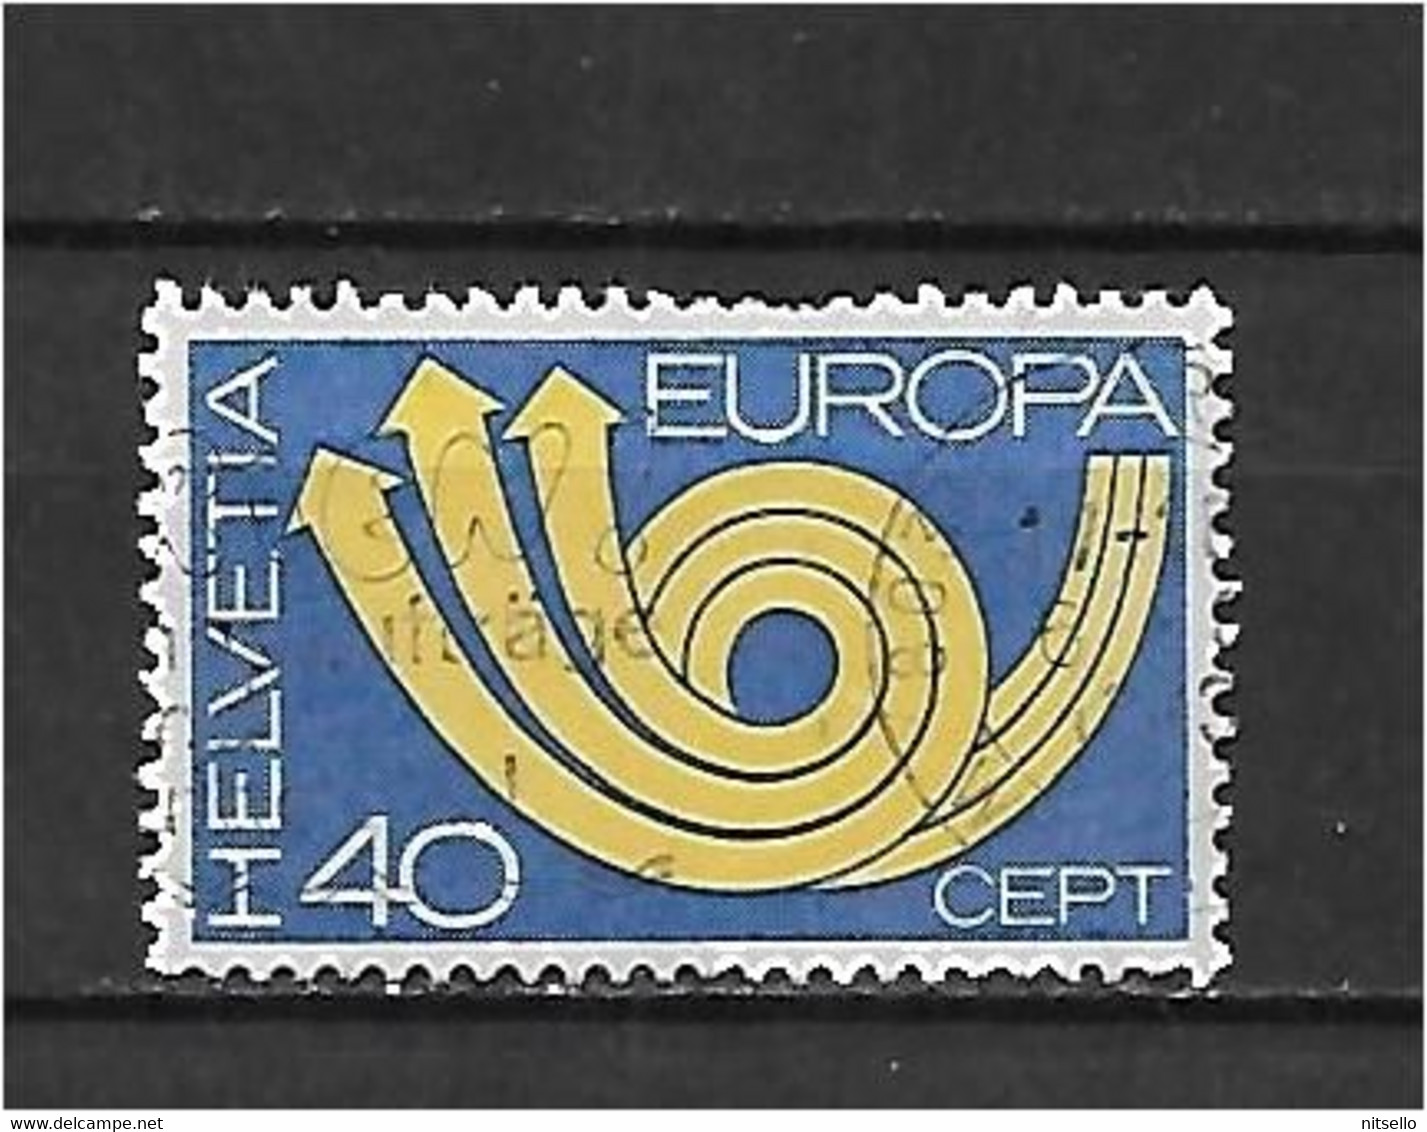 LOTE 1530  ///  SUIZA   YVERT Nº:925  ¡¡¡ OFERTA - LIQUIDATION - JE LIQUIDE !!! - Used Stamps